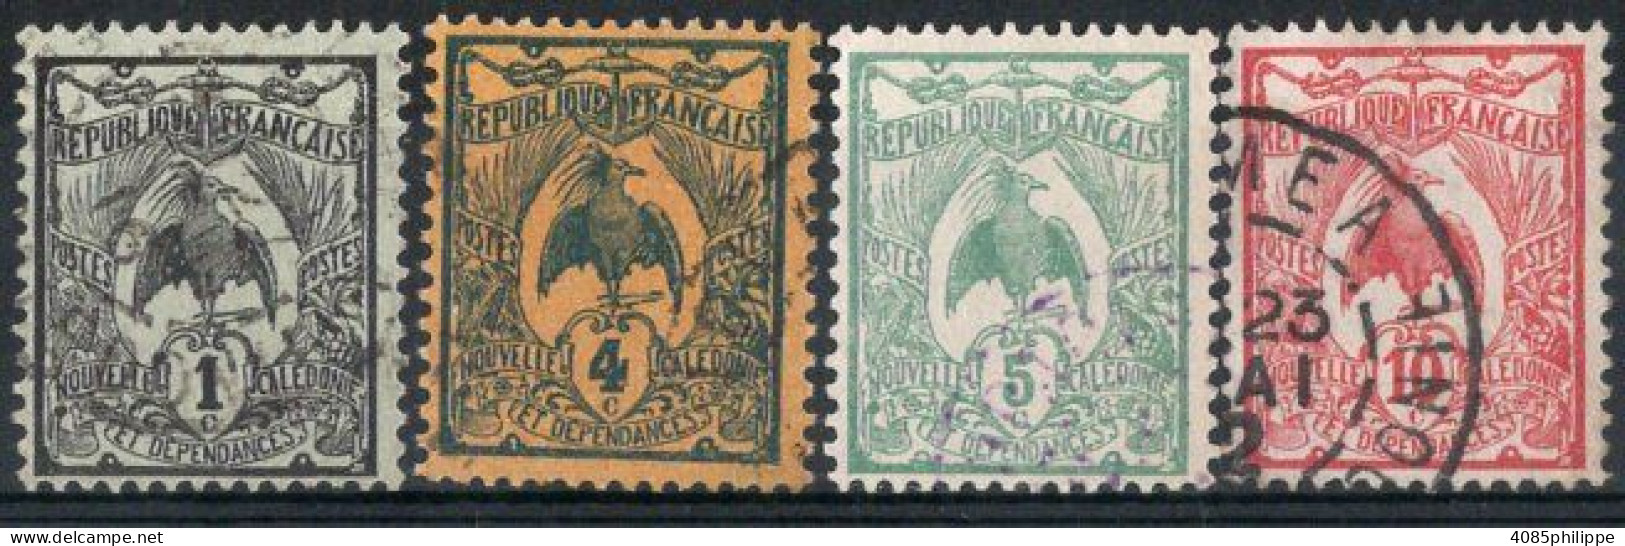 Nvelle CALEDONIE Timbres-Poste N°88, 90 & 91 Oblitérés TB Cote : 4€25 - Used Stamps